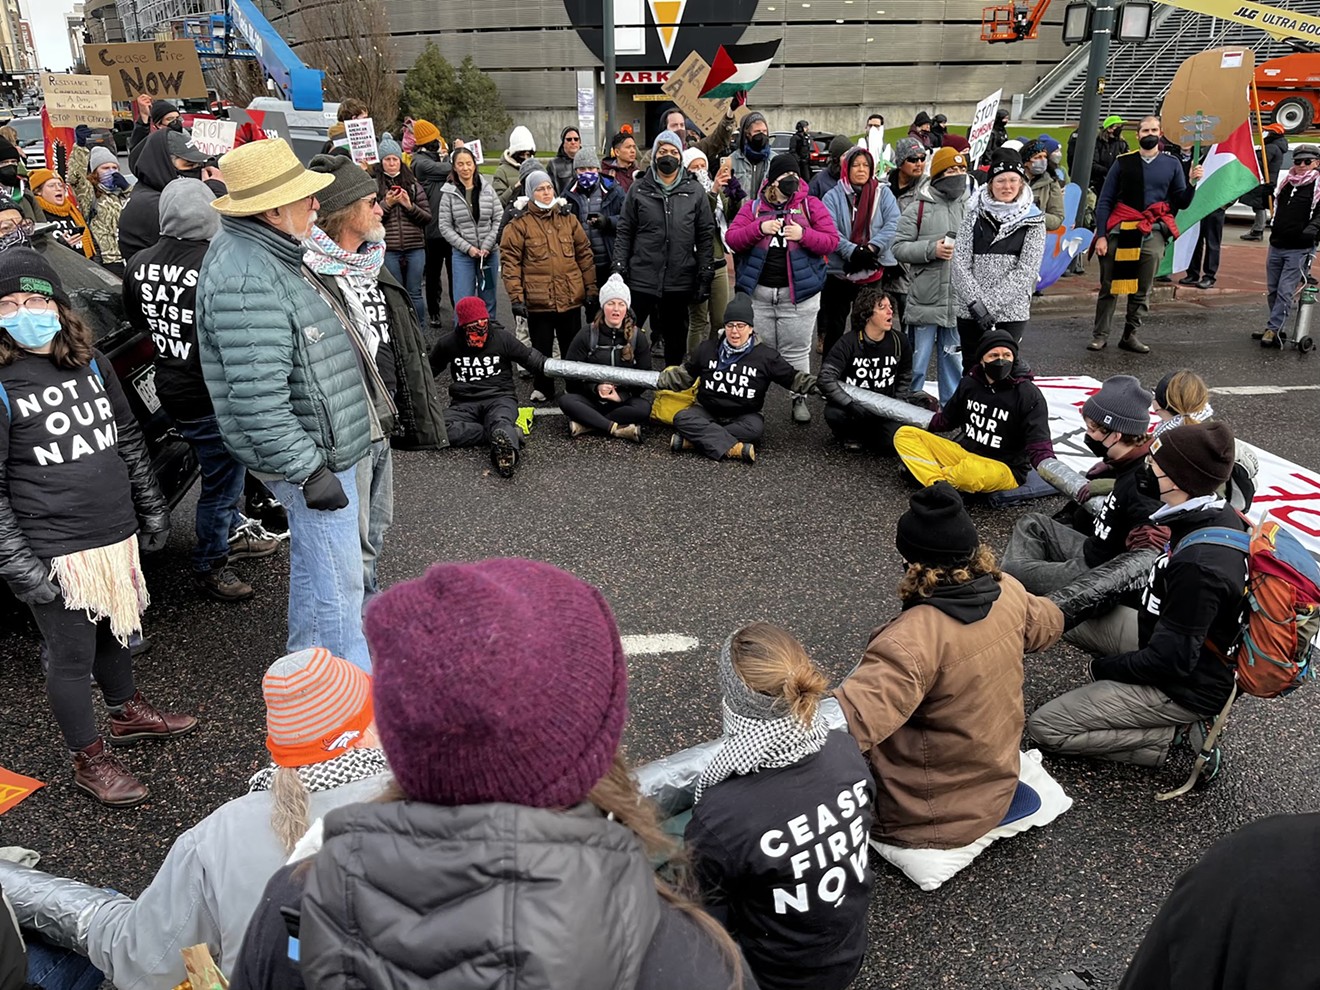 Jewish Voice for Peace protesters staged their sit-in on Speer Boulevard near the Colorado Convention Center as it hosted the Jewish National Fund’s 2023 Global Conference for Israel.